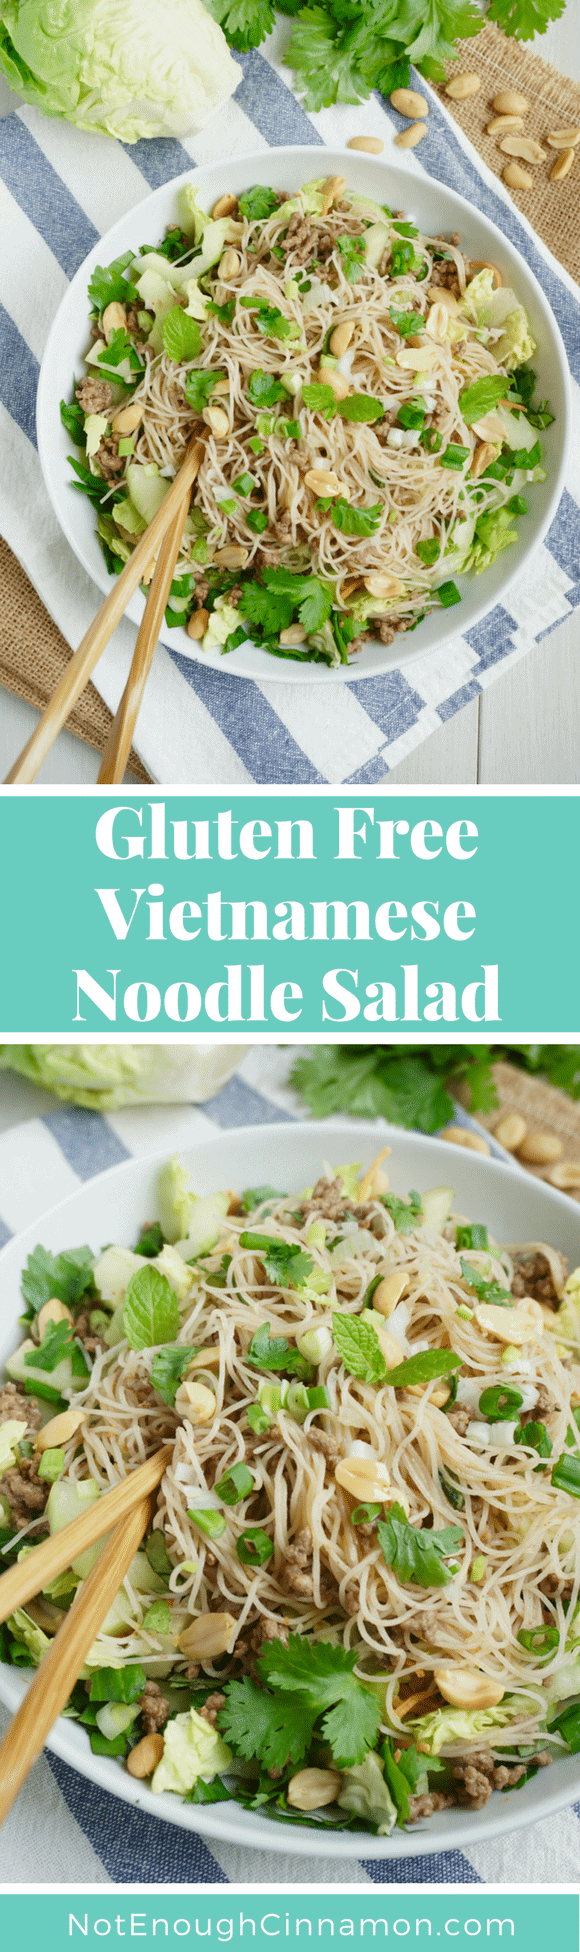 Find this healthy recipe for Vietnamese Noodle Salad {Gluten Free} on NotEnoughCinnamon.com